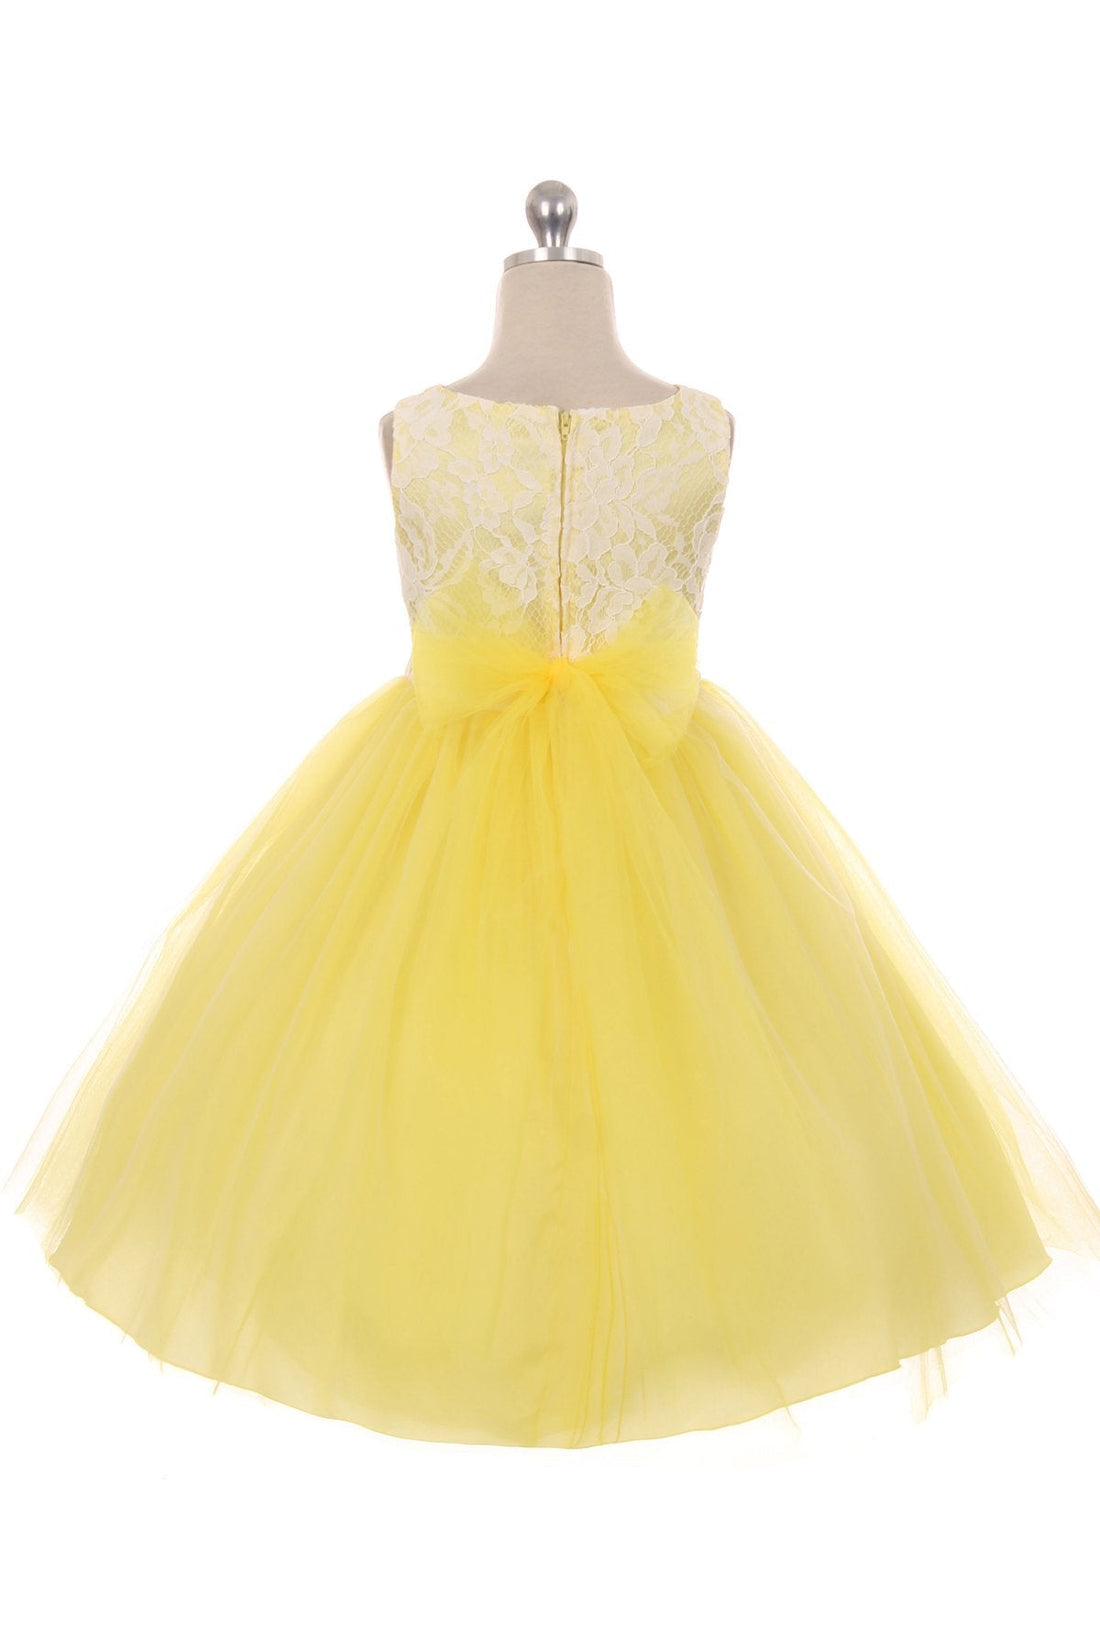 Girl Party Lace Illusion Dress by AS414 Kids Dream - Girl Formal Dresses